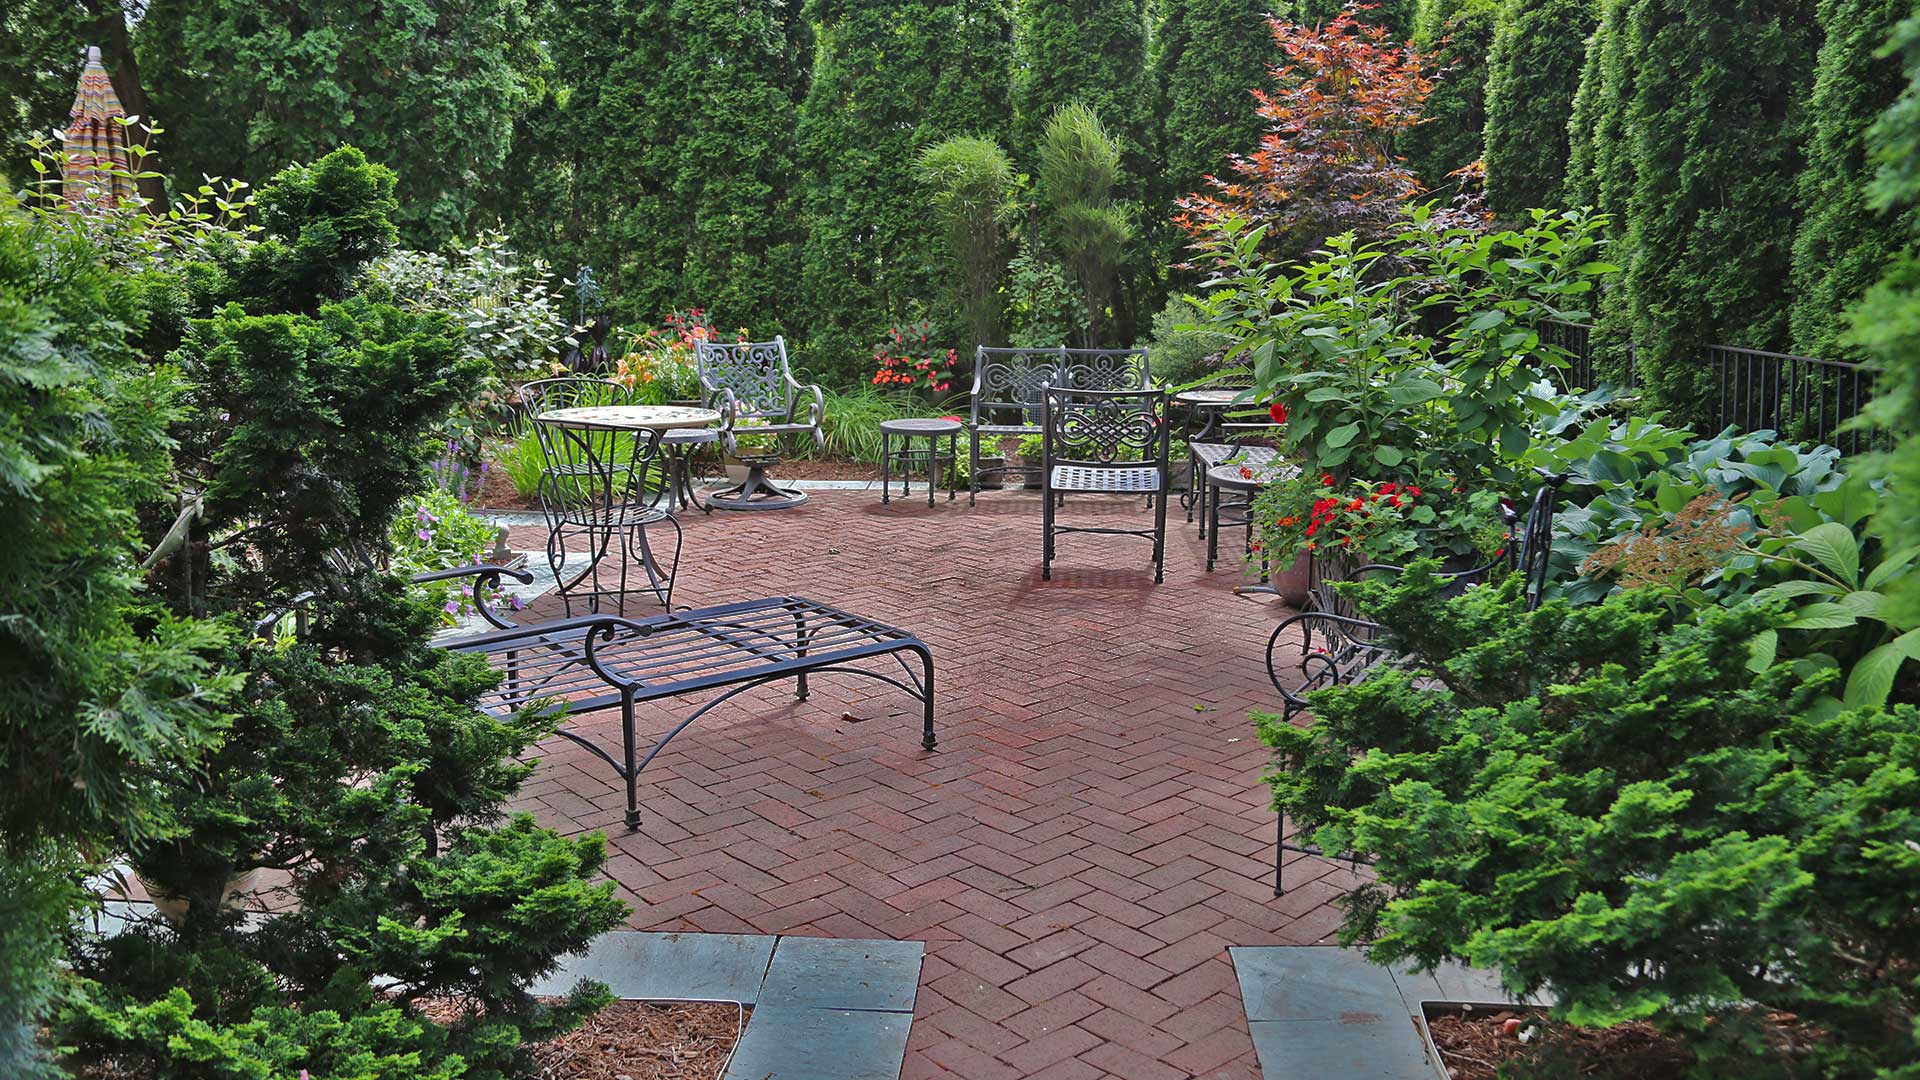 Patio and walkway with black furniture surrounded by green foliage in Dewitt, MI.